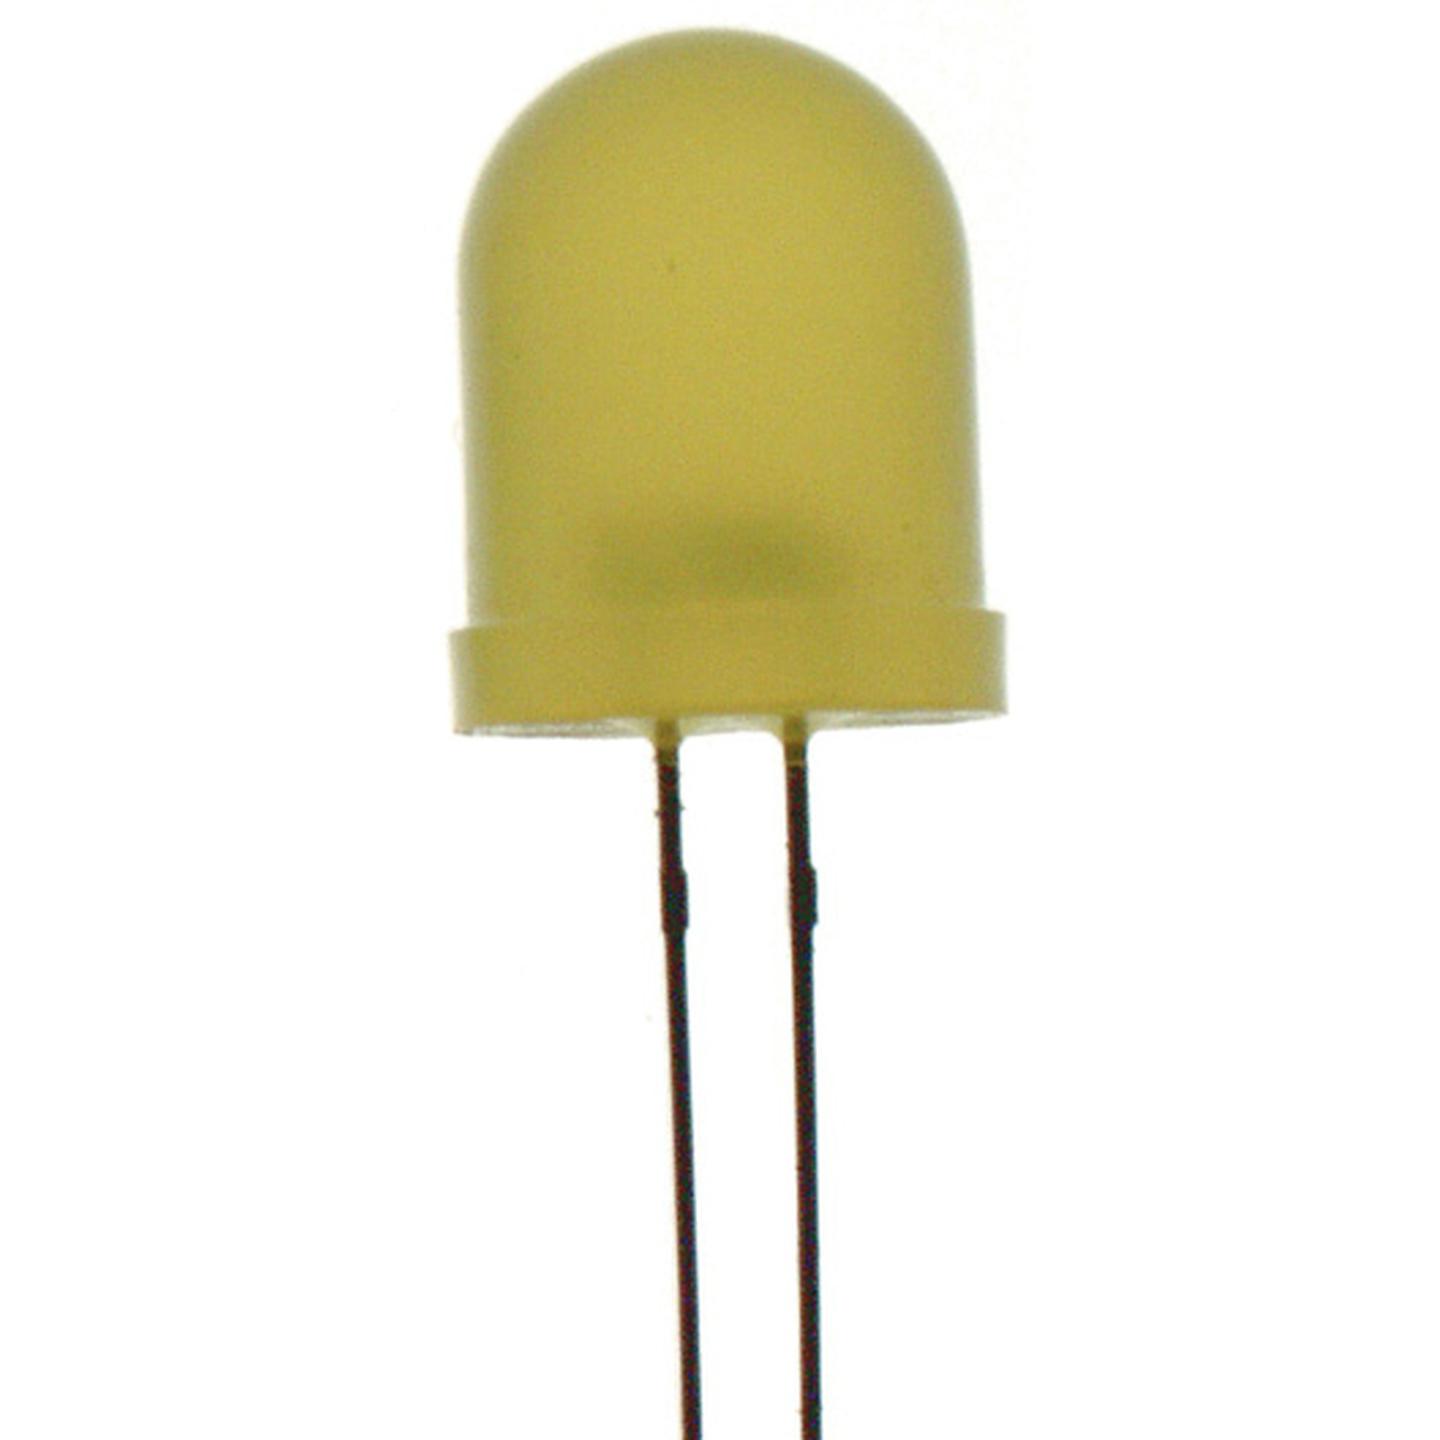 Yellow 5mm LED 70mcd Round Diffused